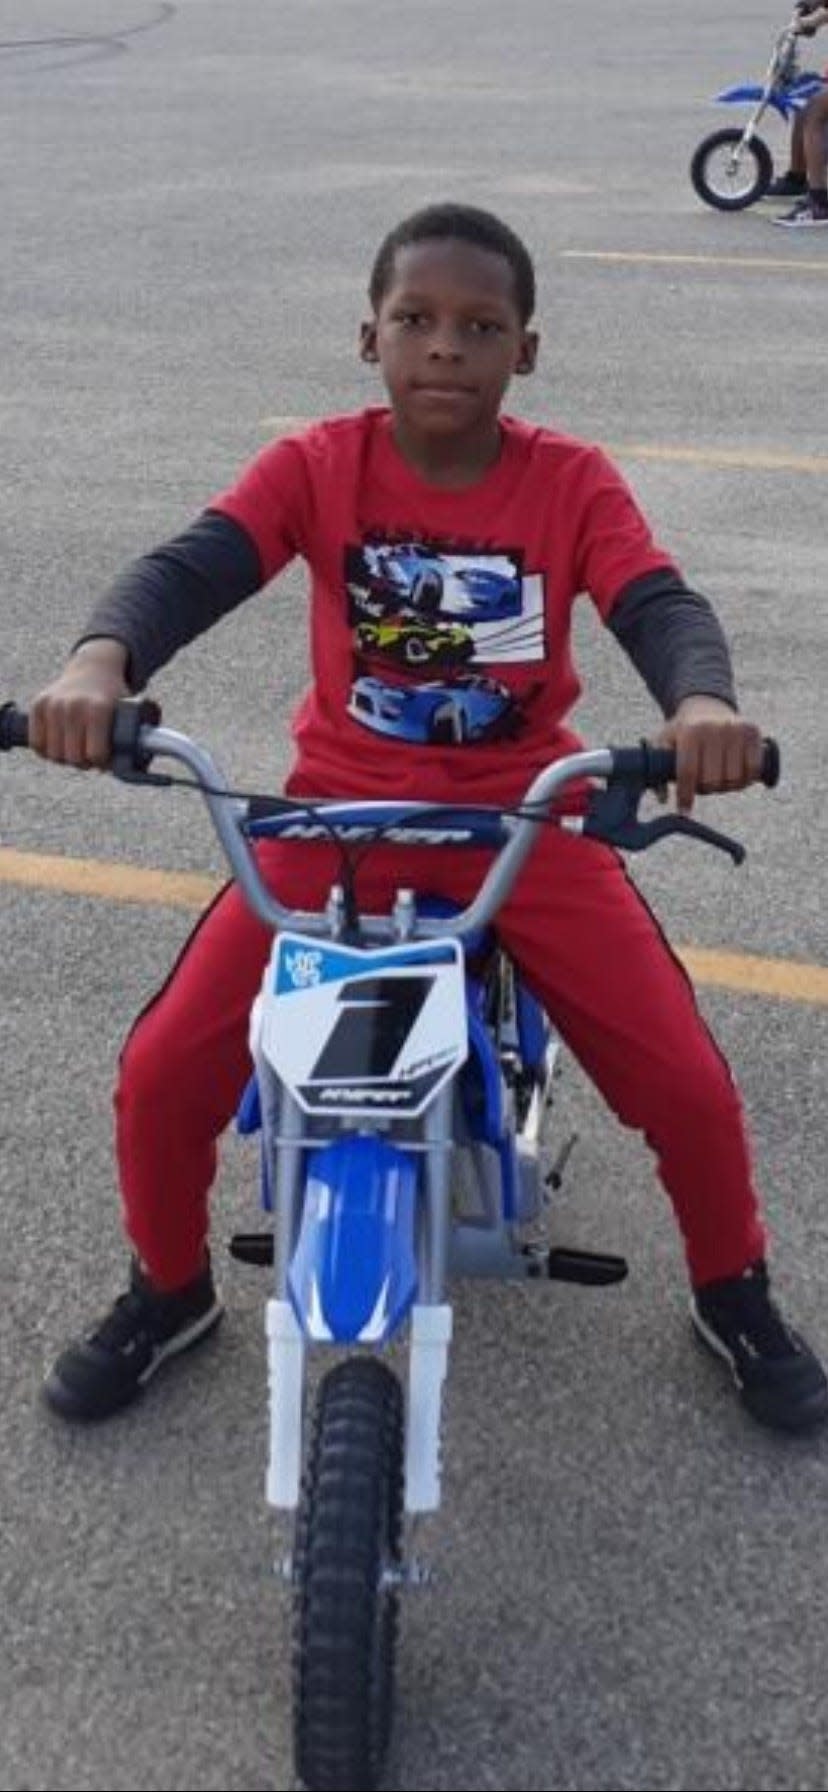 10-year-old Troy Erving sits on his electronic dirt bike in this family supplied photo